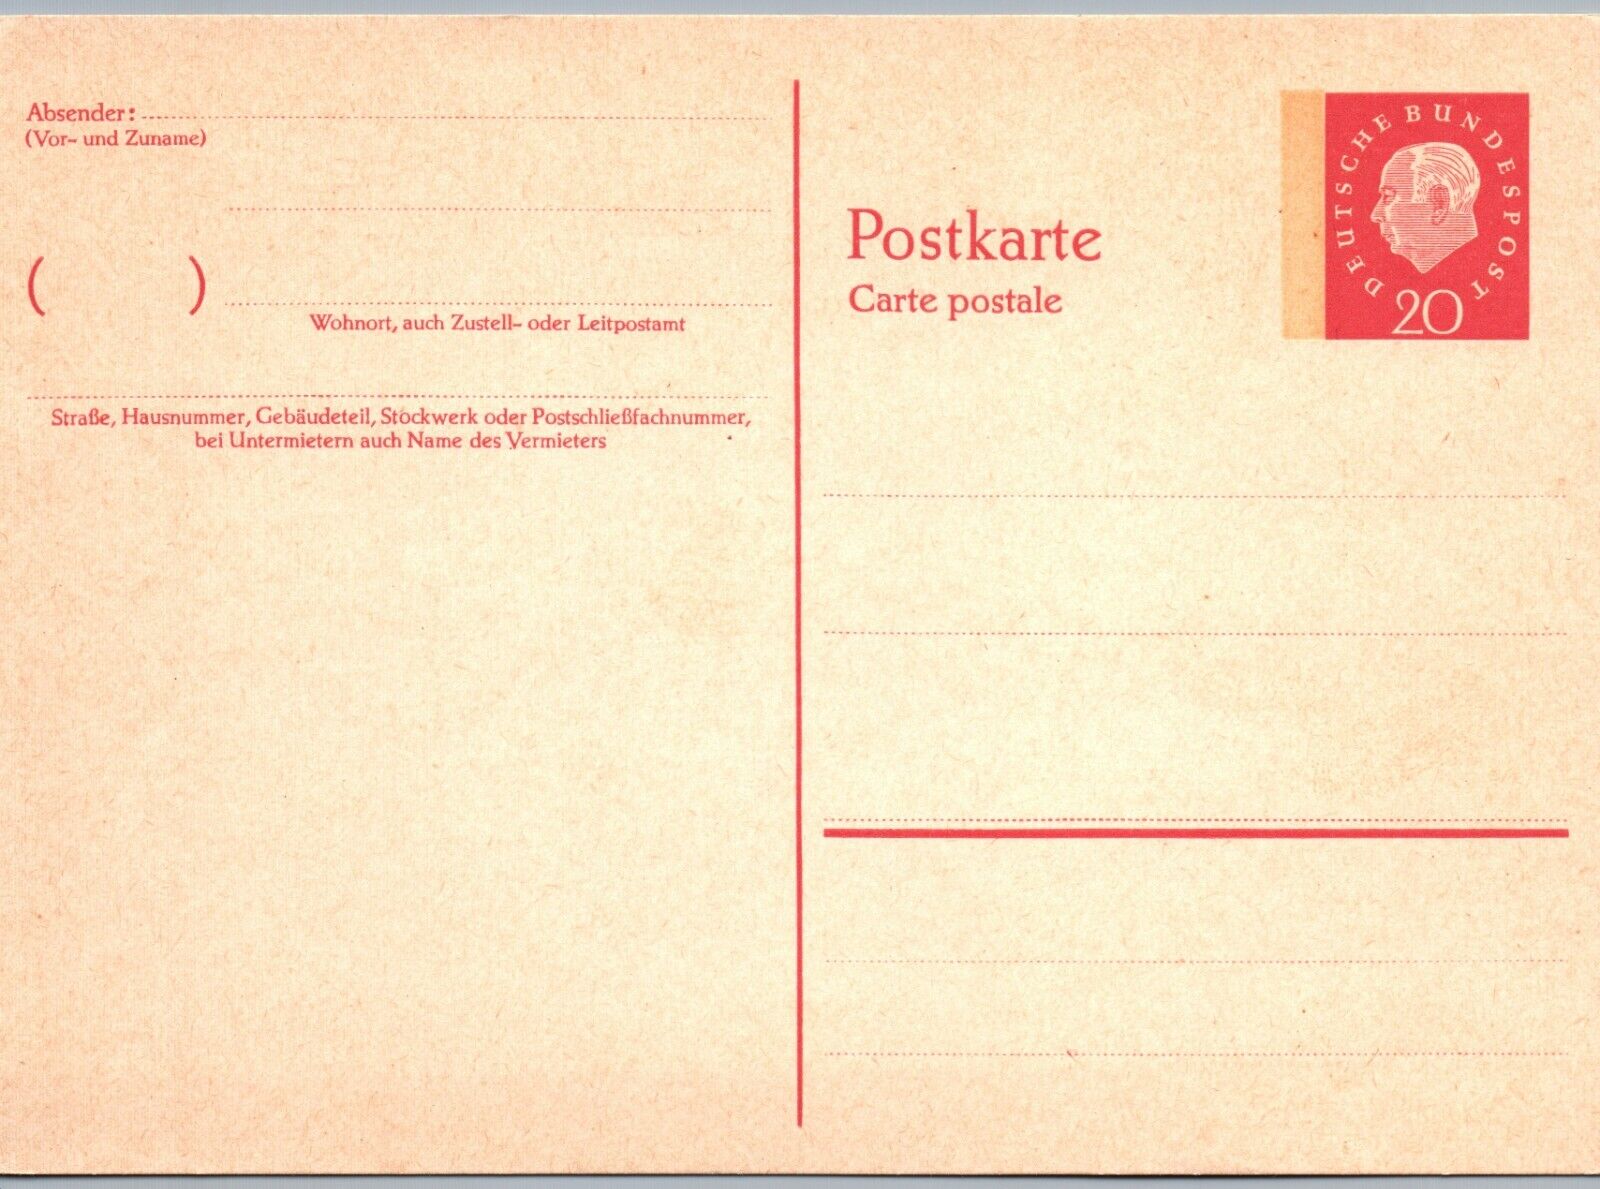 CONTINENTAL SIZE POSTAL CARD: 20 Pfenning WEST GERMANY INTERNATIONAL POST RATE